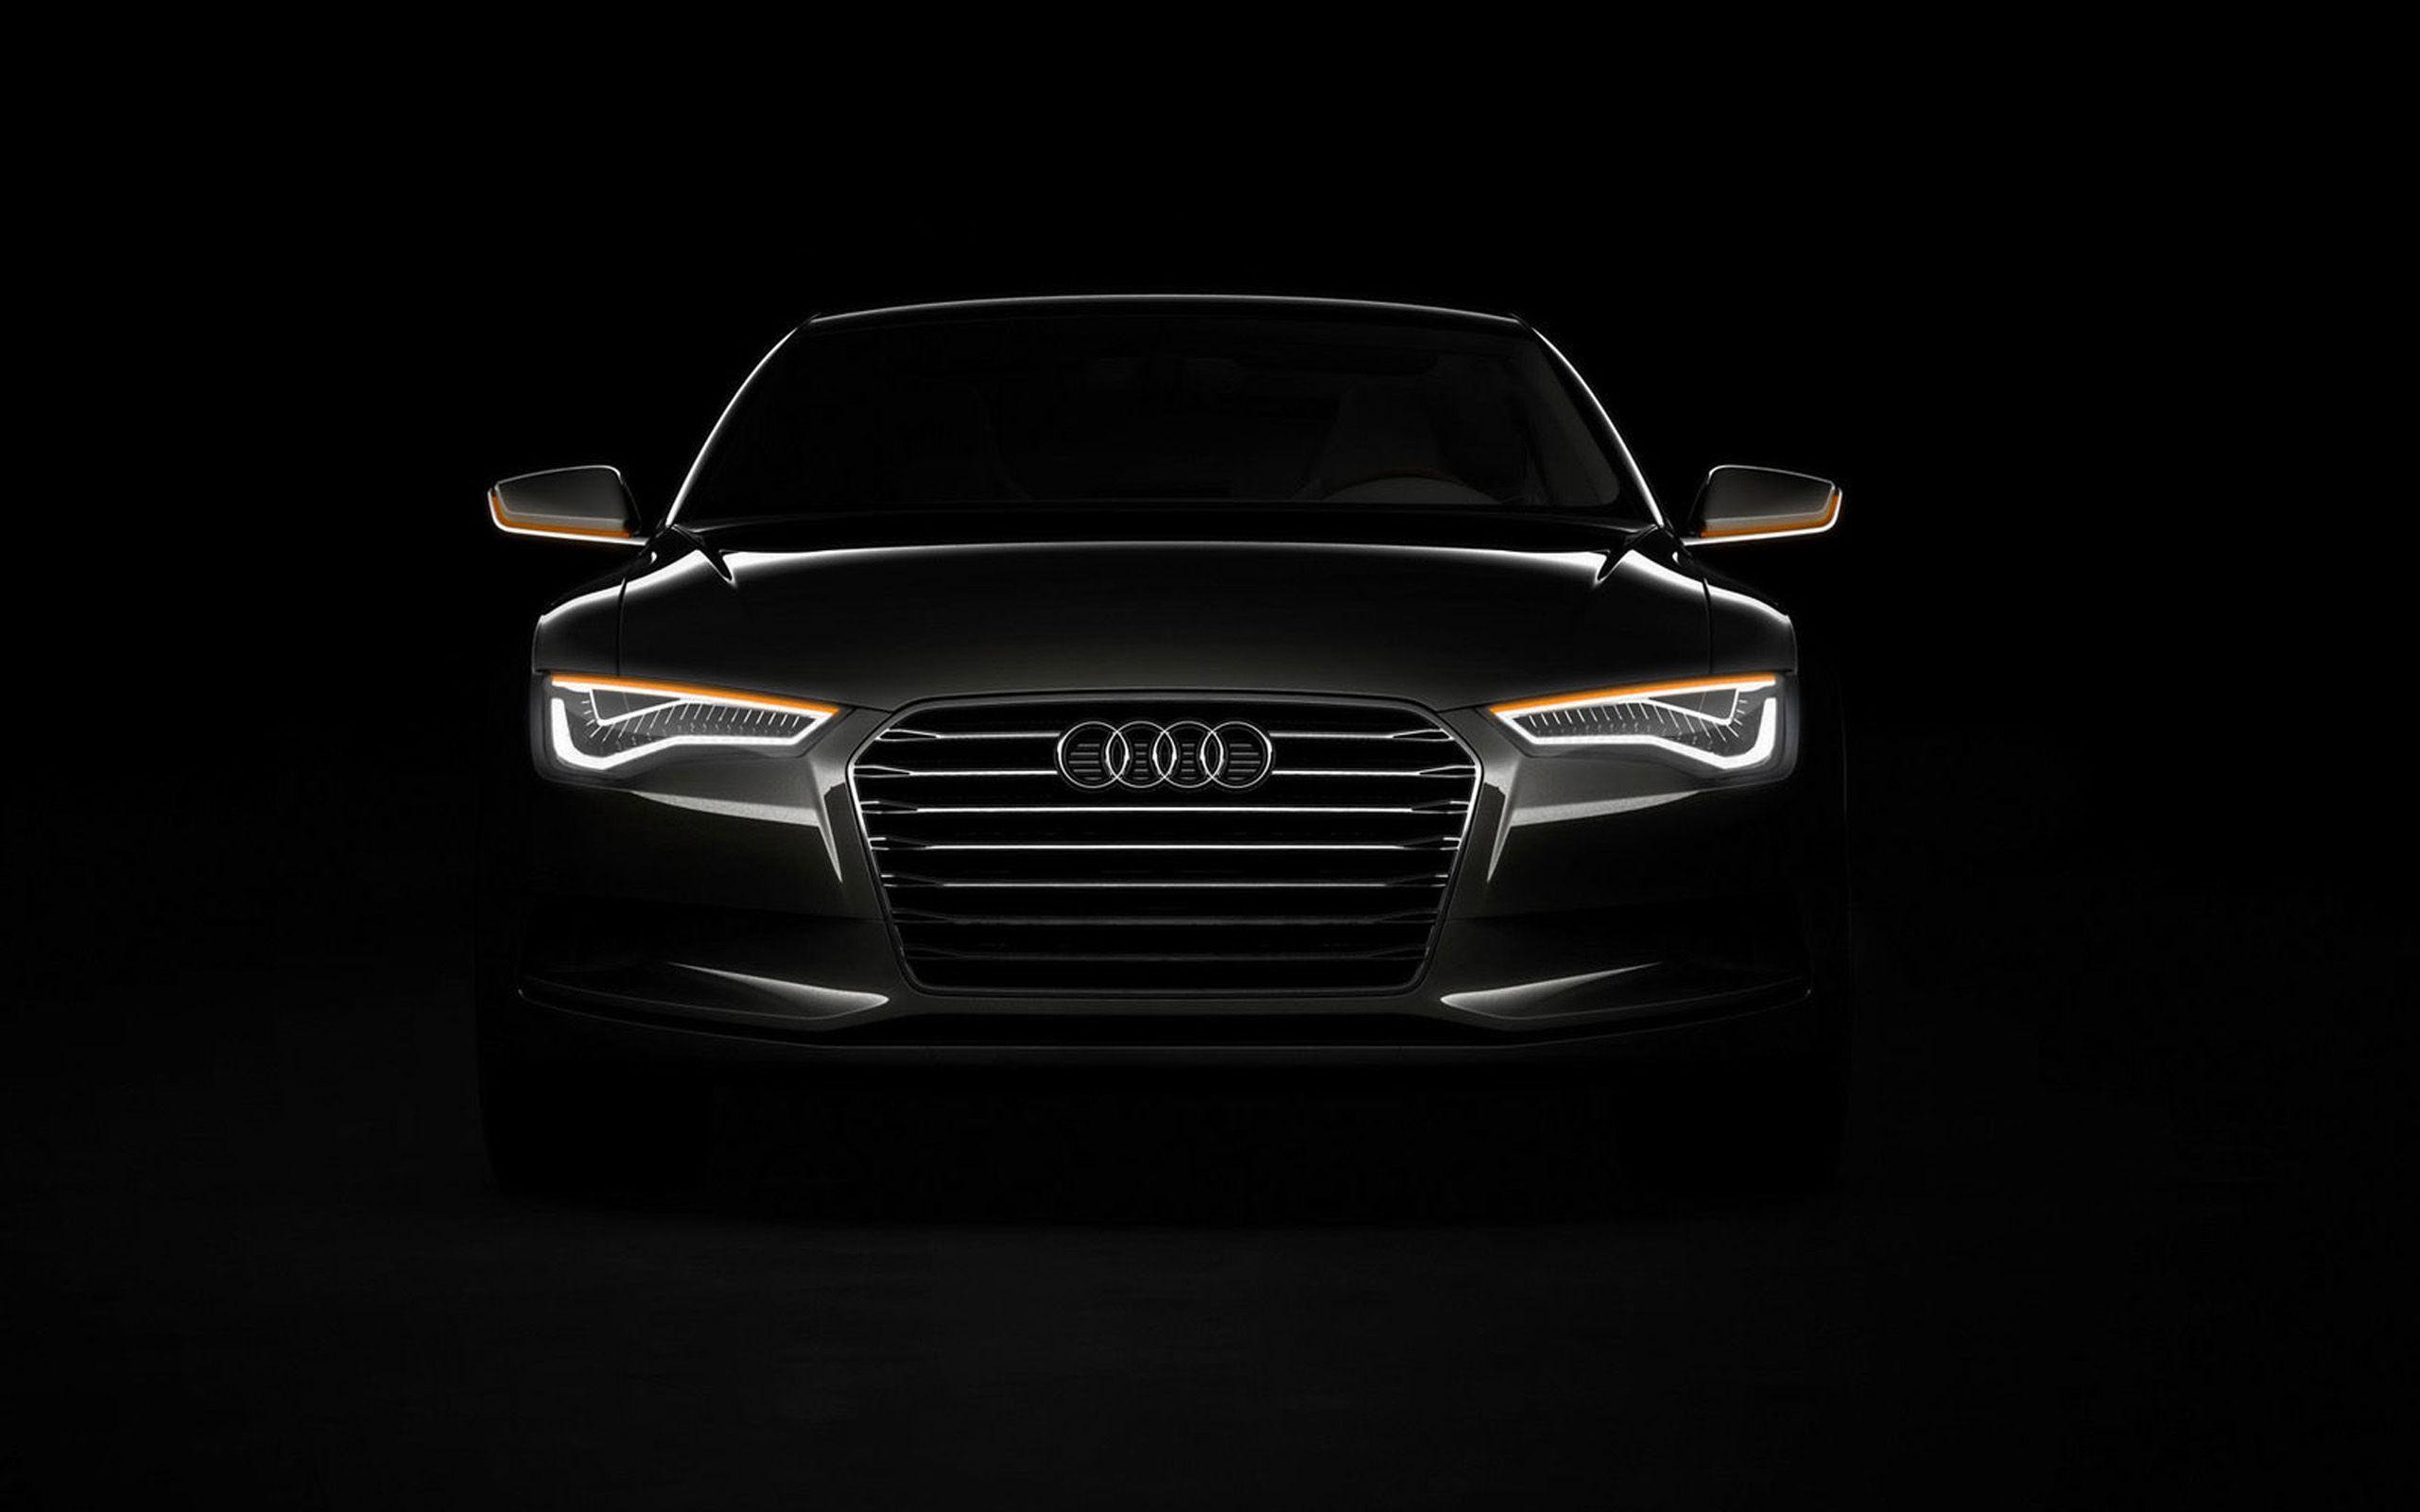 Best Audi Wallpaper in High Quality, Audi Background